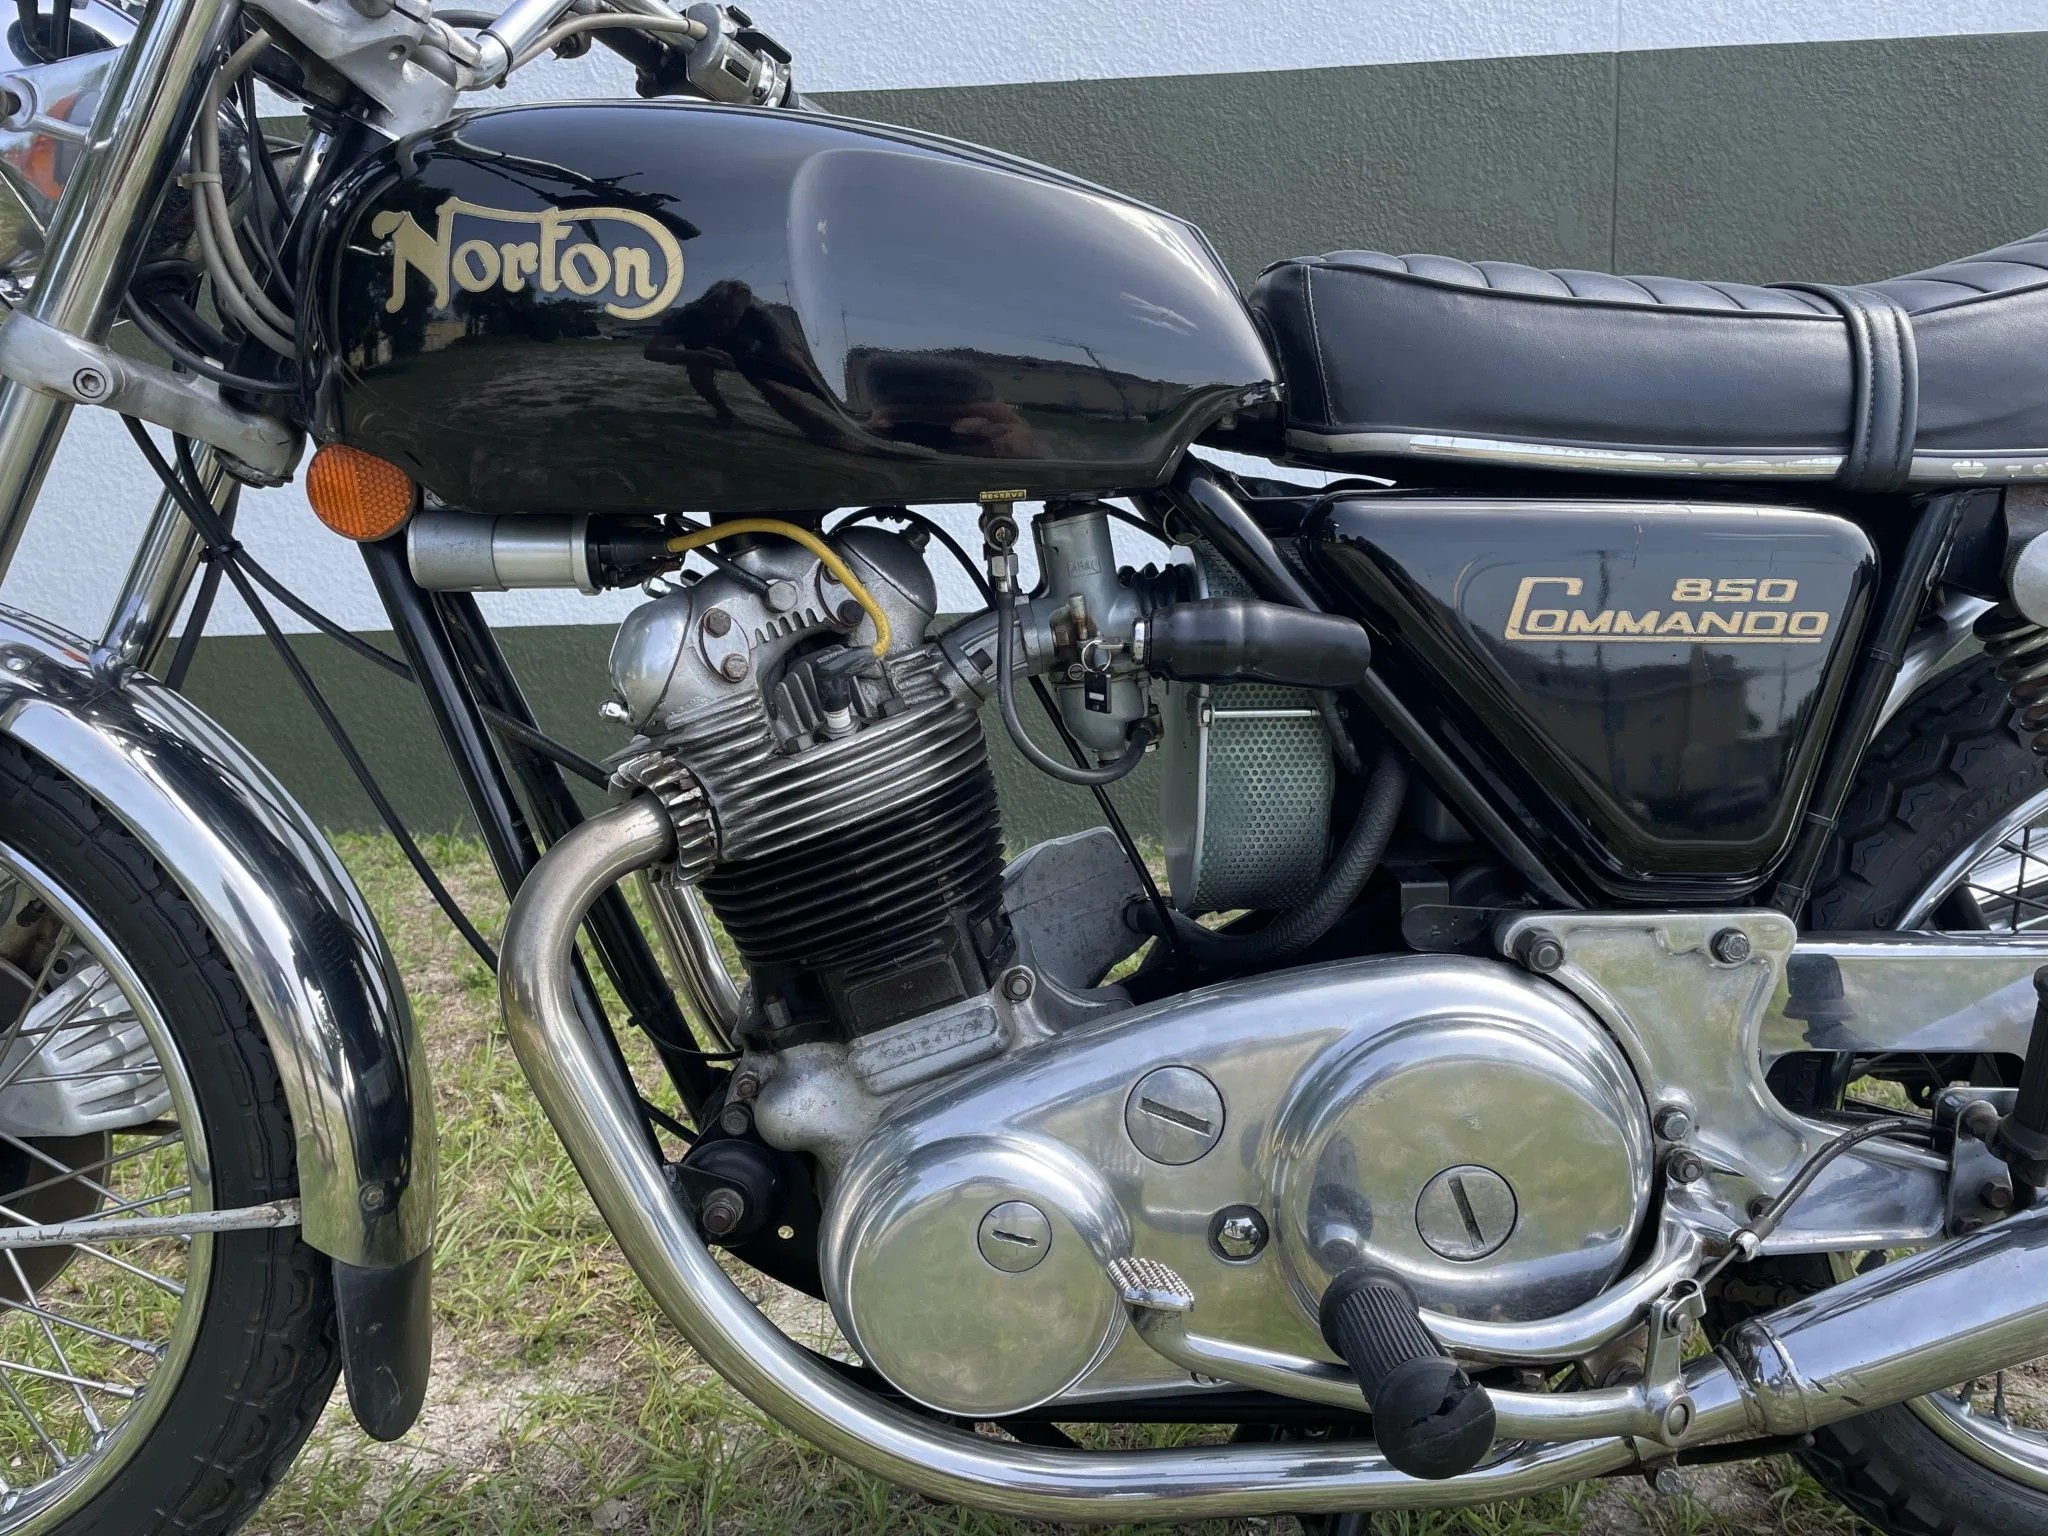 Pristine 1974 Norton Commando 850 With Overbored Engine Is Almost Fit For A Museum Autoevolution